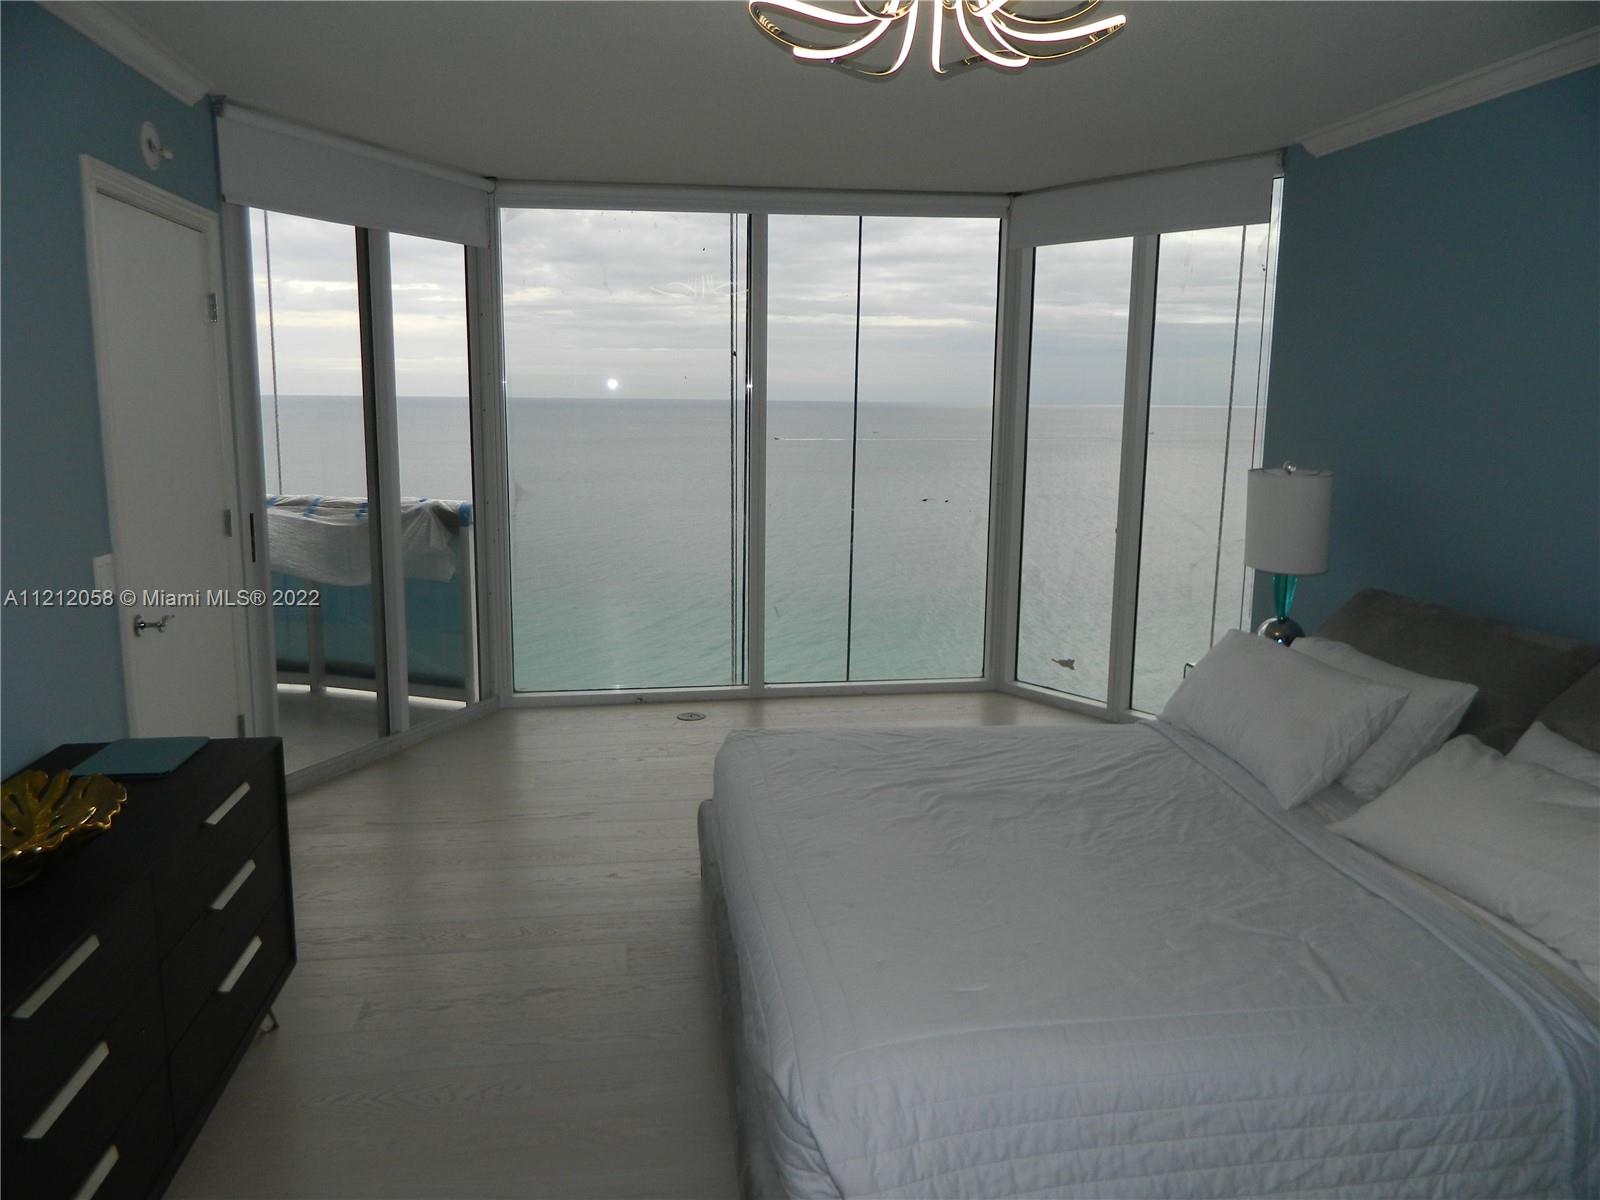 Enjoy resort lifestyle living at its best. Sunrise to sunset vistas. Award winning floor plan with 2 full bedroom
suites facing the ocean and a Third bedroom with panoramic city and bay views. Very spacios kitchen with room
for breakfast table. Floor to ceiling windows. Very functional split plan with plenty of privacy. All amenities recently
renovated. Full beach service with chairs towel and umbrellas, Fitness center, Spa, tennis, ping pong, pool table,
library, kids room,, social rooms and more. Easy to show.